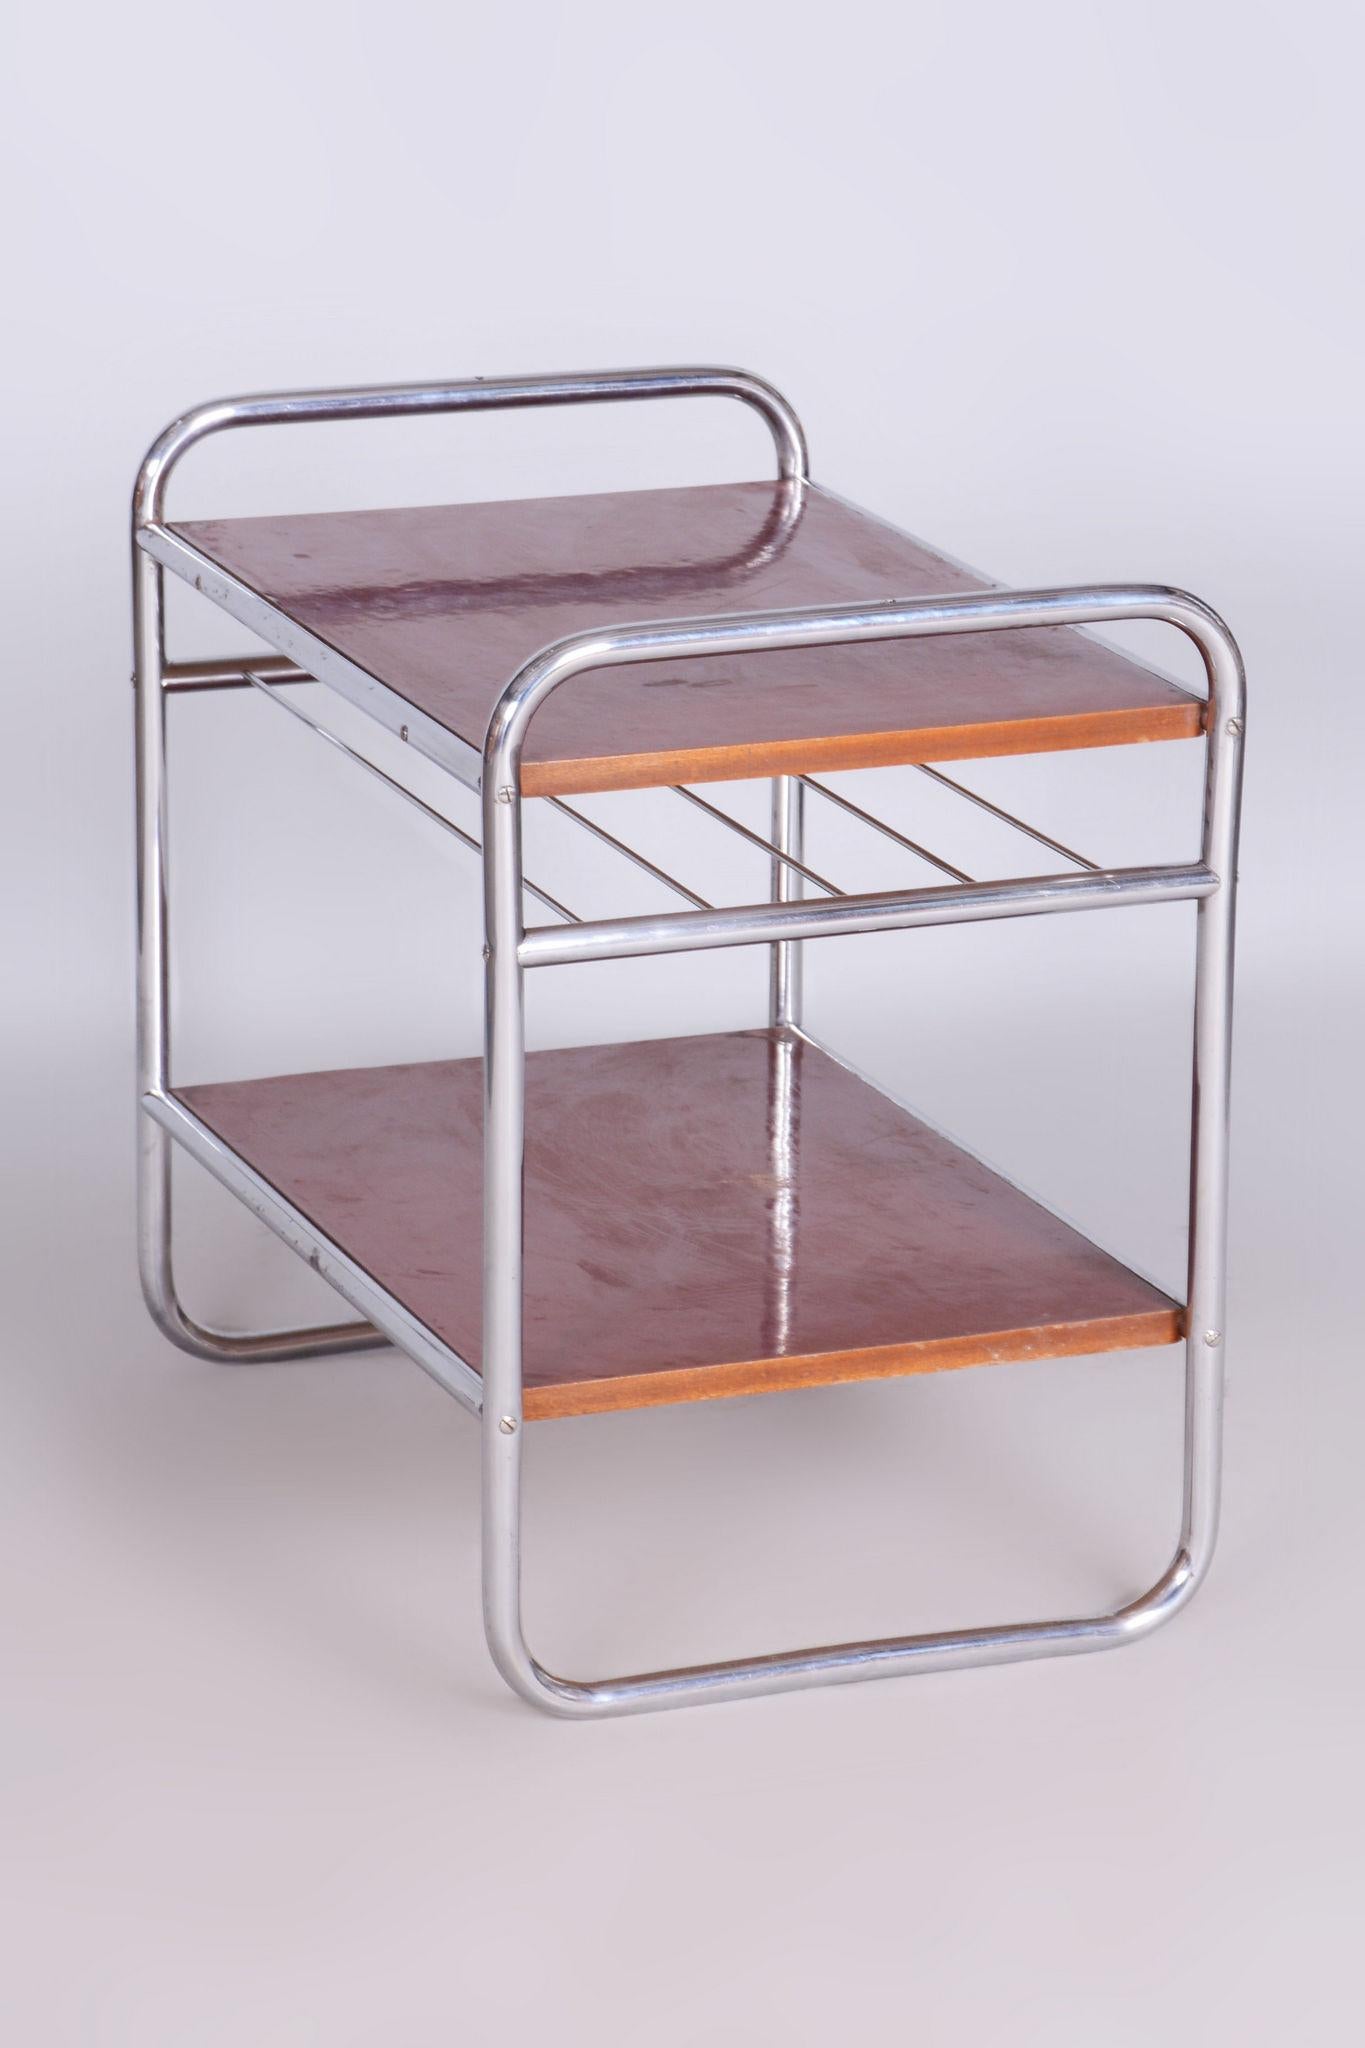 Mid-20th Century Original Bauhaus Side Table, Chrome-Plated Steel, Czechia, 1930s For Sale